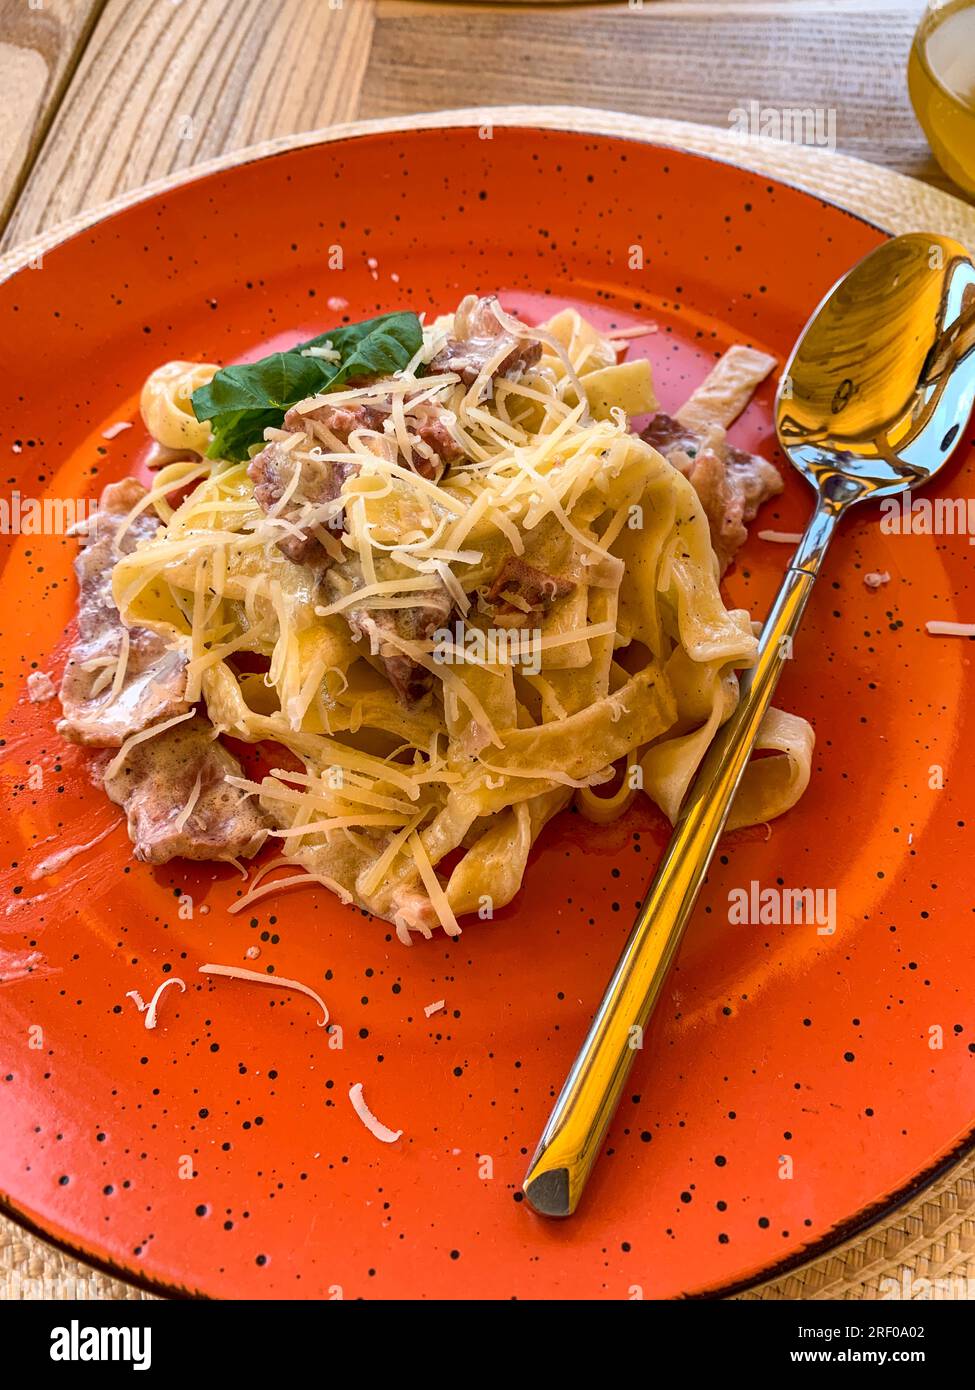 Kazakhstan, Almaty. Chicken and Pasta for Lunch. Stock Photo